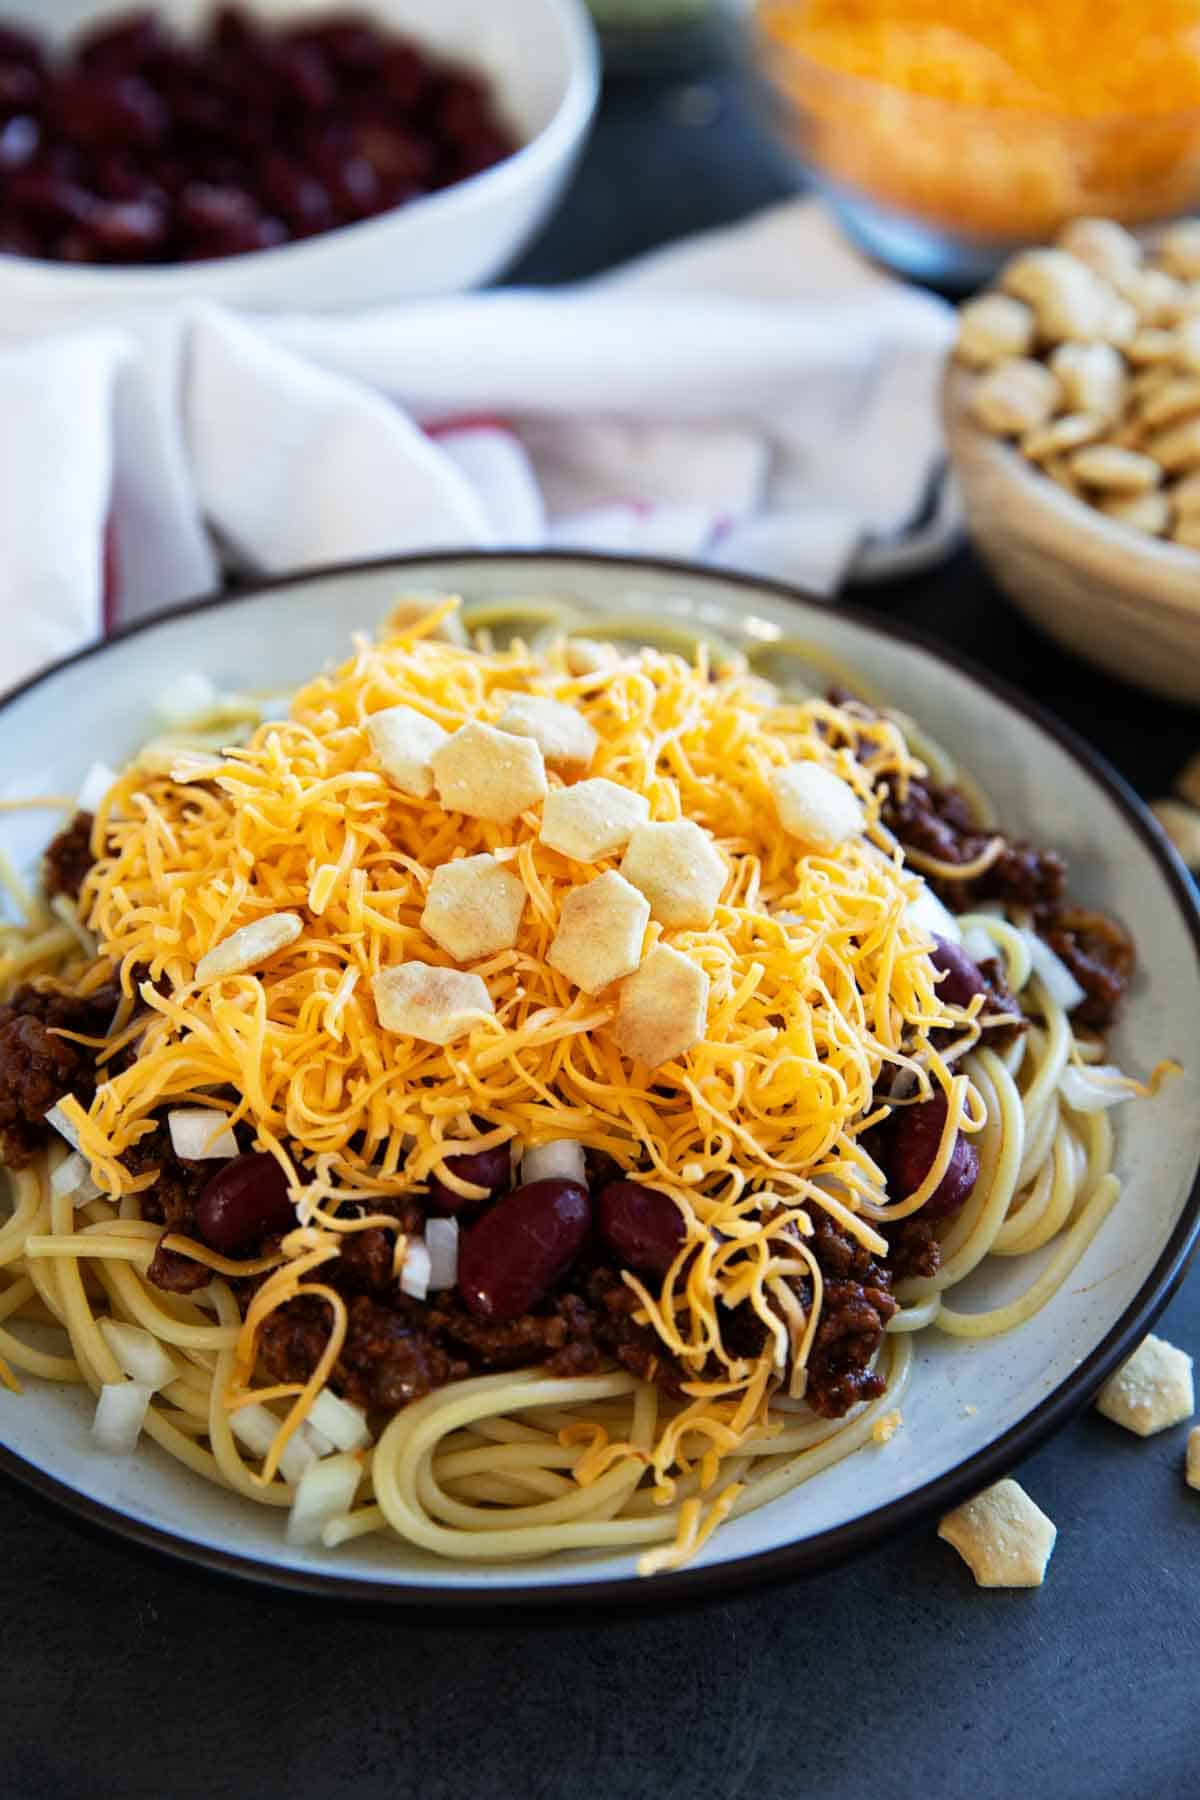 Plate filled with Cincinnati Chili served 5 way with cheese, onions, and kidney beans.